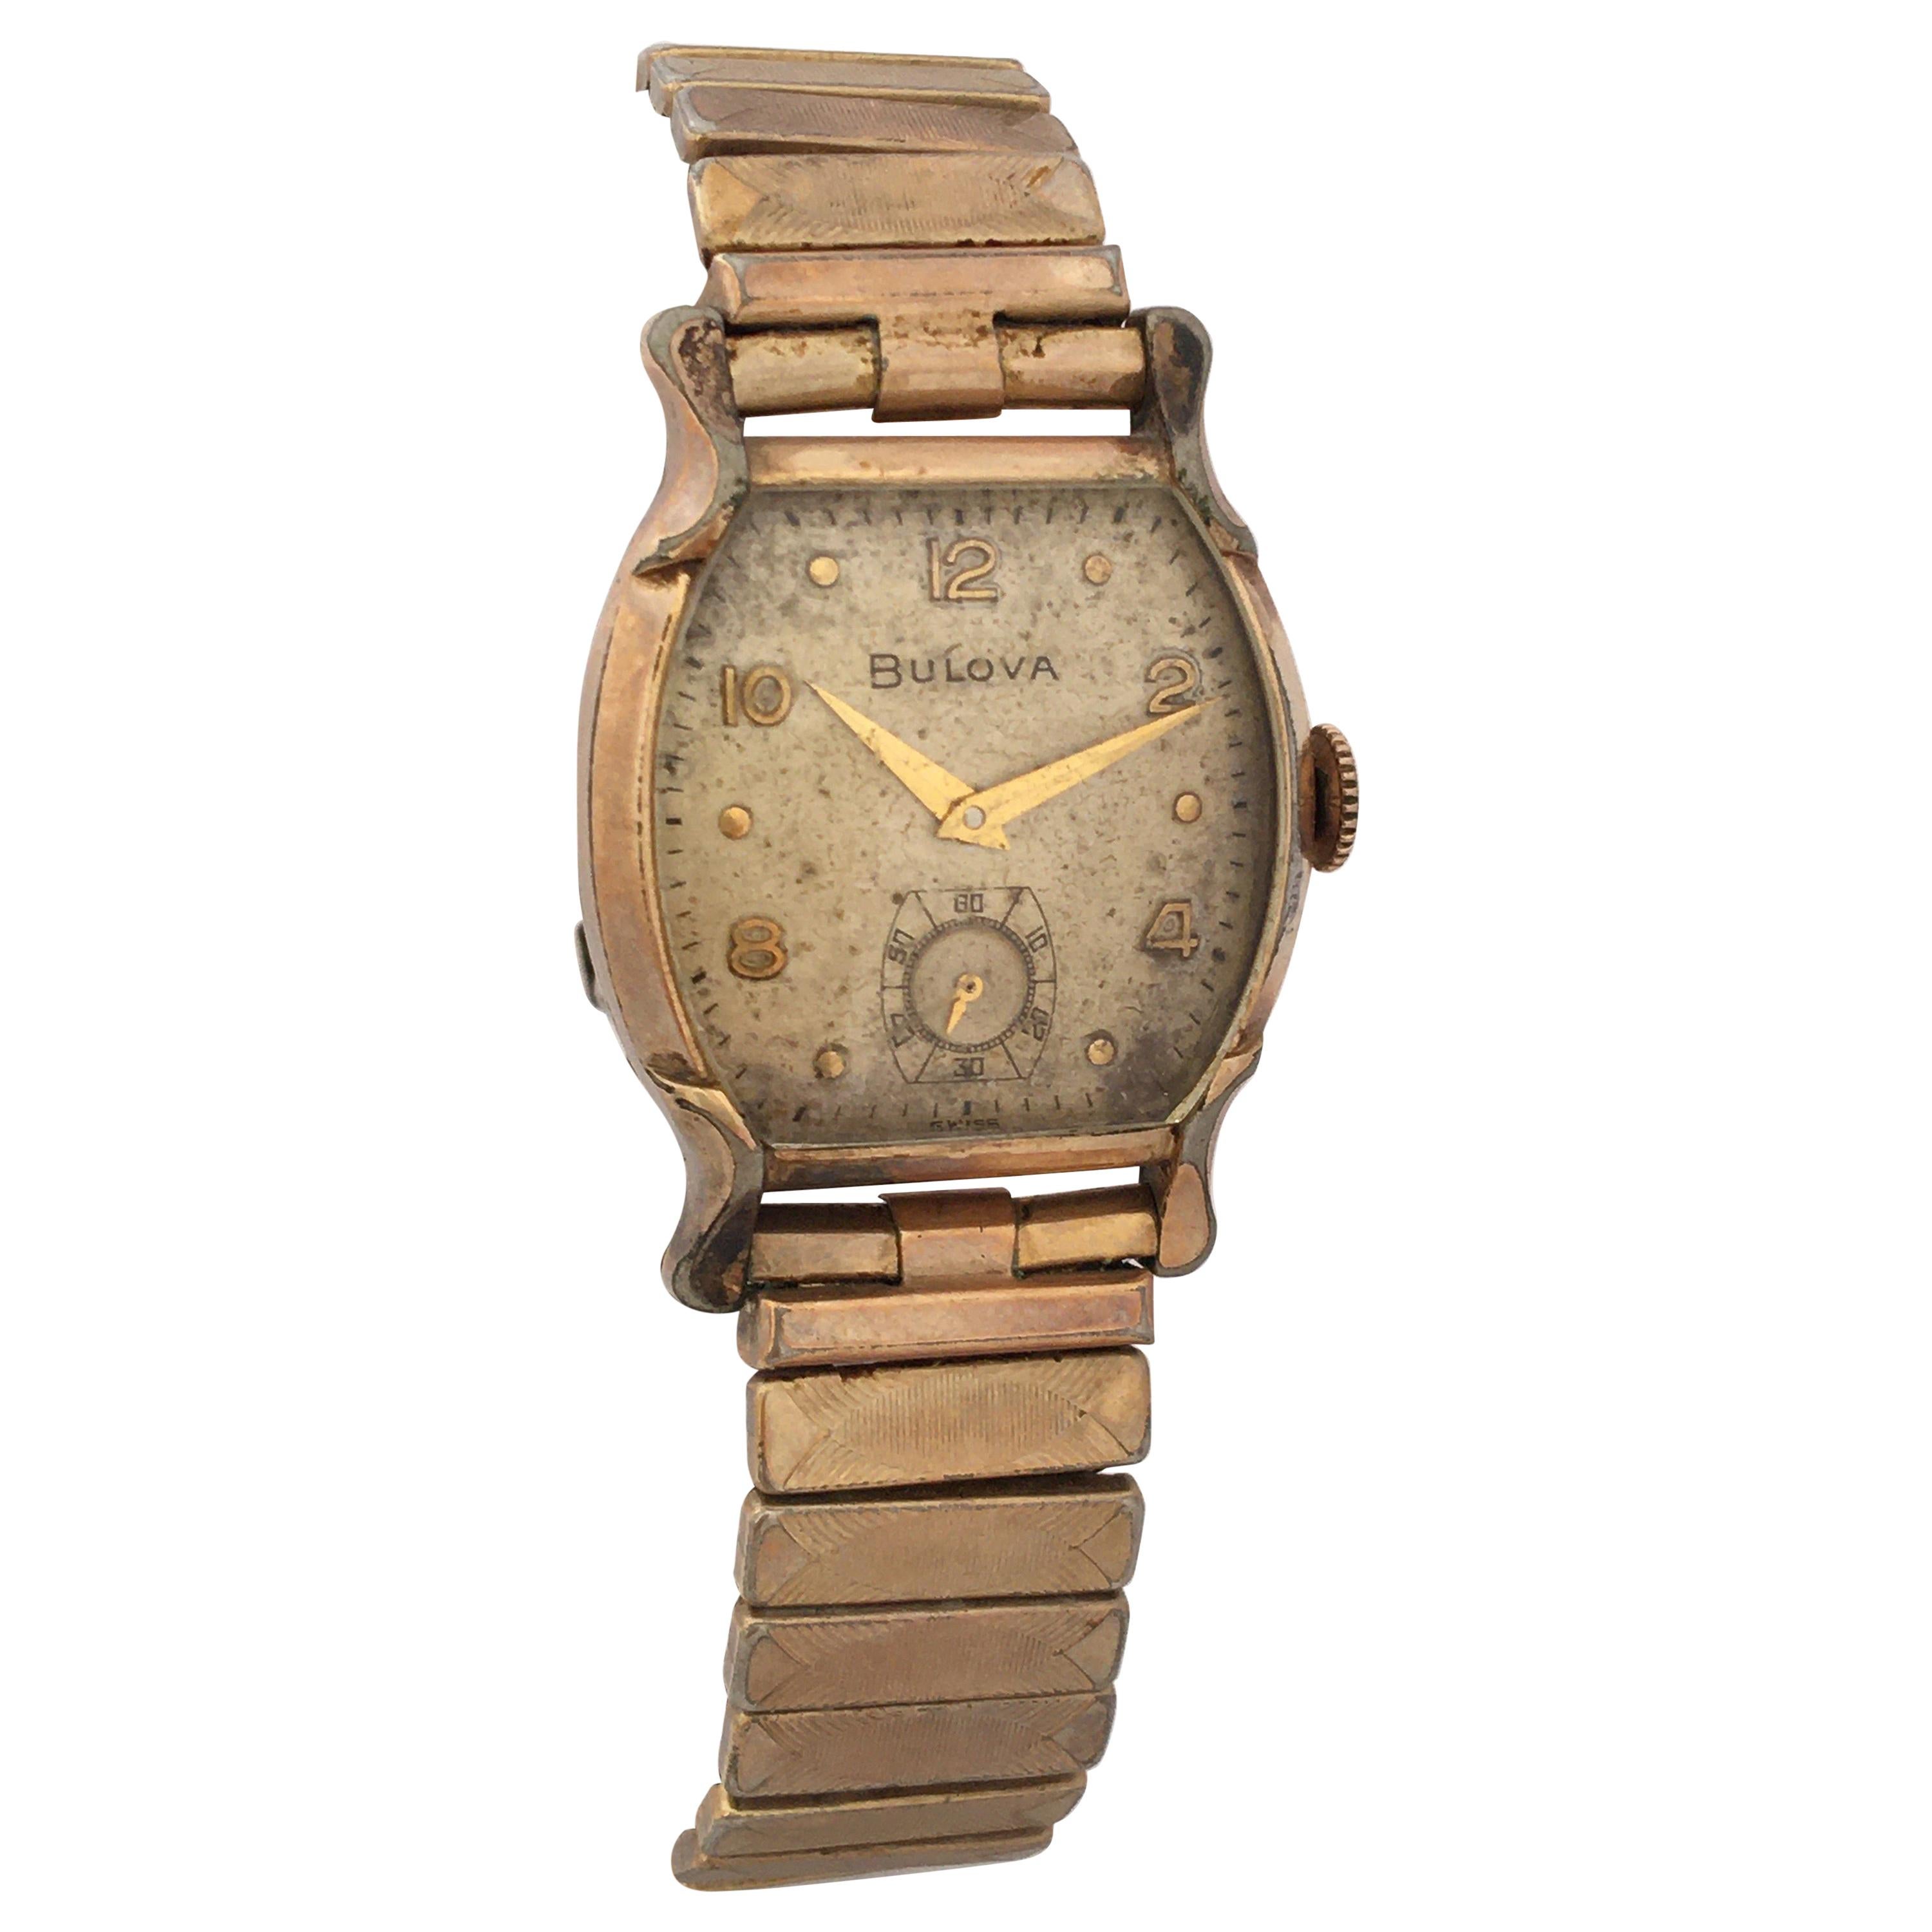 Vintage 1940s Gold-Plated Bulova Mechanical Watch For Sale